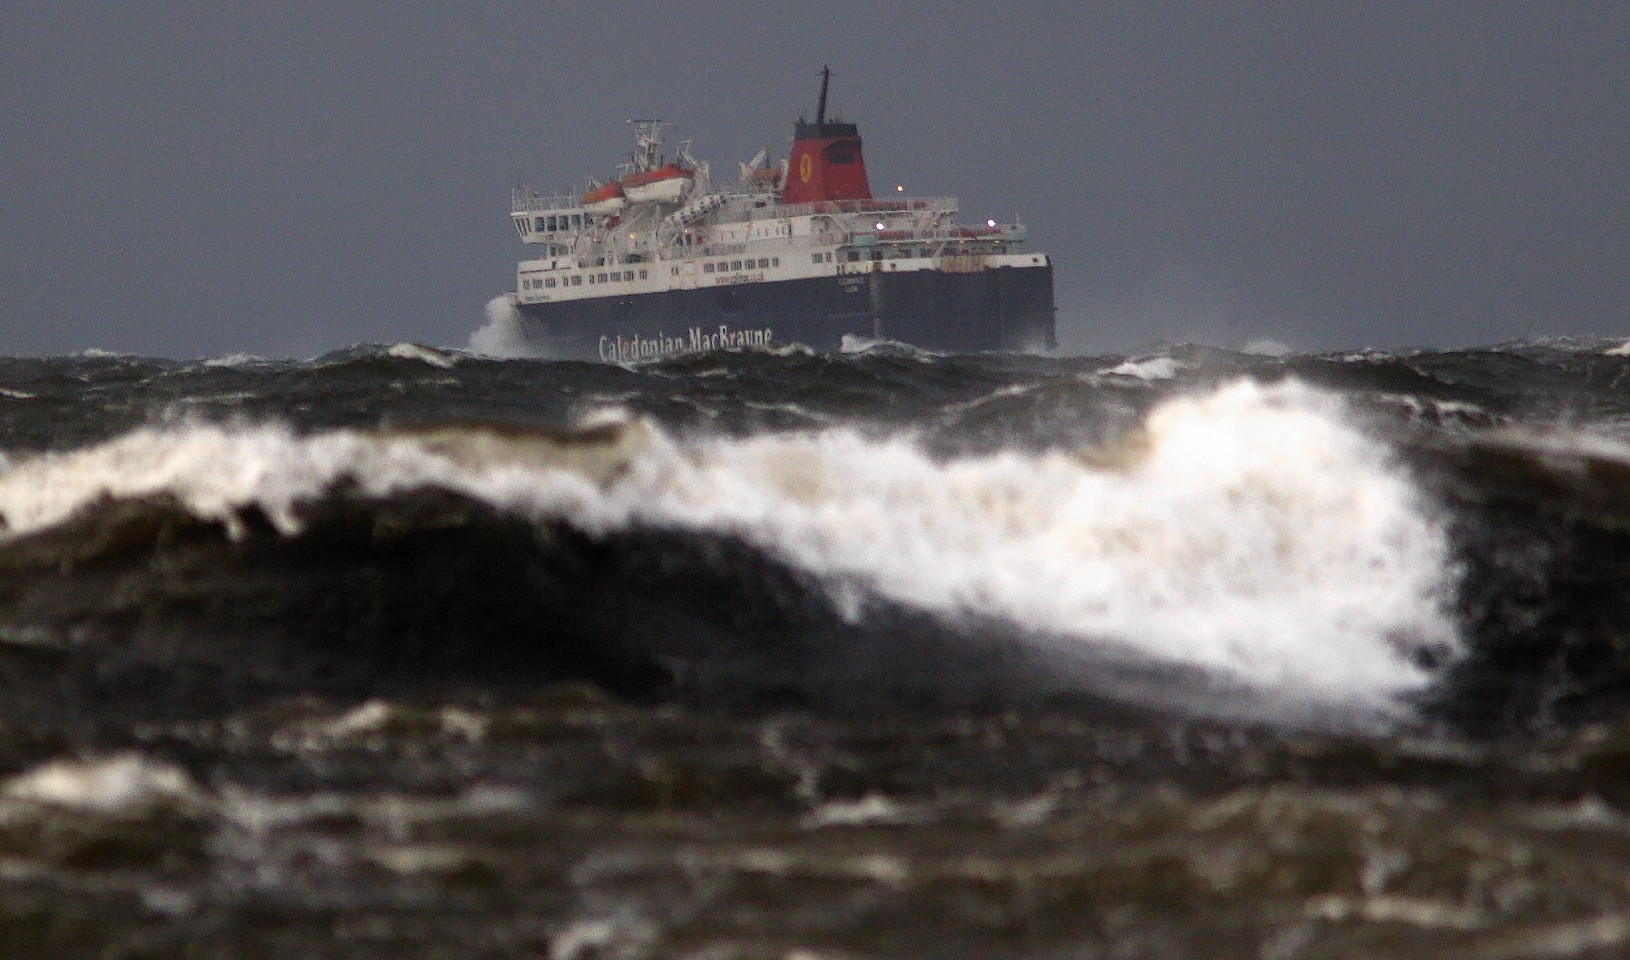 Several CalMac and NorthLink ferry services were disrupted